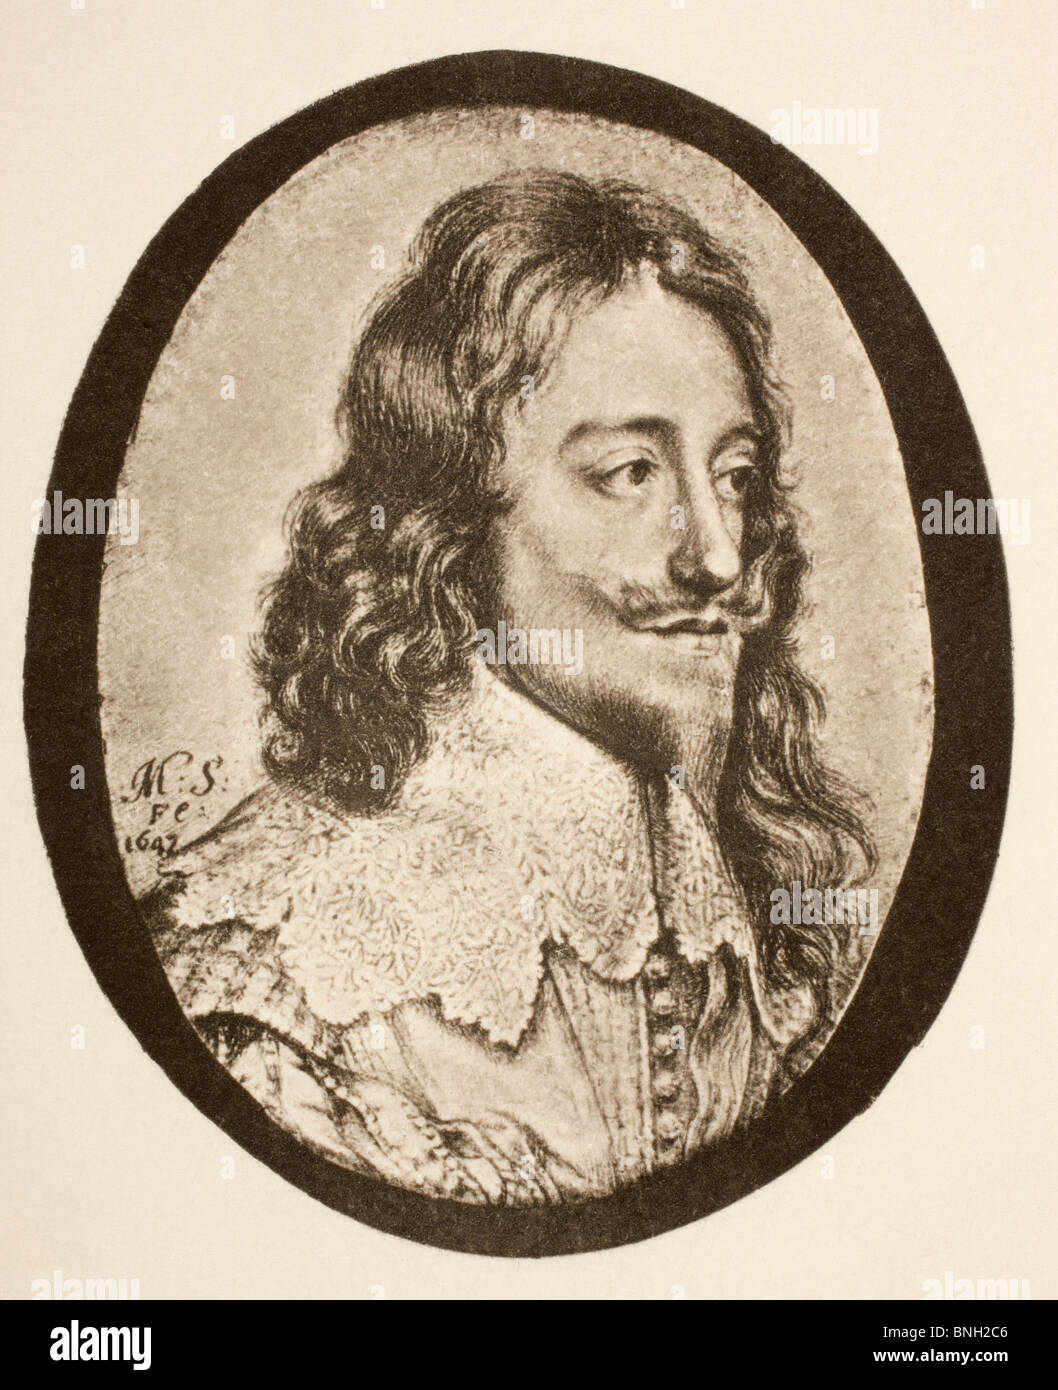 King charles died. Charles i King of England. King Charles 3rd. King Charles в полный рост.